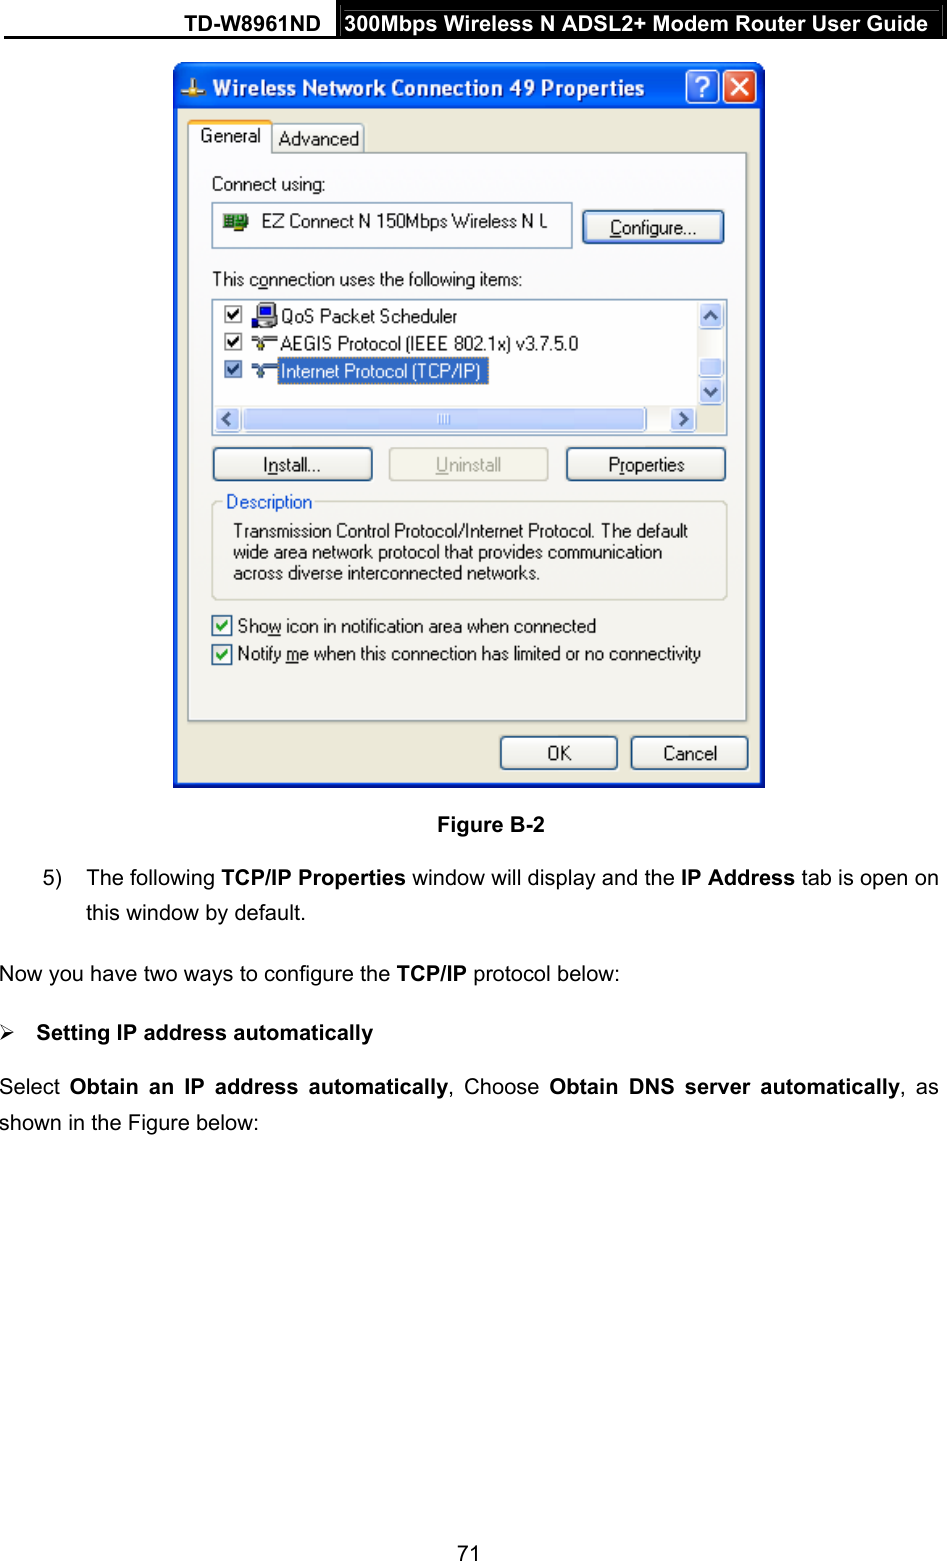 TD-W8961ND  300Mbps Wireless N ADSL2+ Modem Router User Guide  71 Figure B-2 5) The following TCP/IP Properties window will display and the IP Address tab is open on this window by default. Now you have two ways to configure the TCP/IP protocol below:  Setting IP address automatically Select  Obtain an IP address automatically, Choose Obtain DNS server automatically, as shown in the Figure below: 